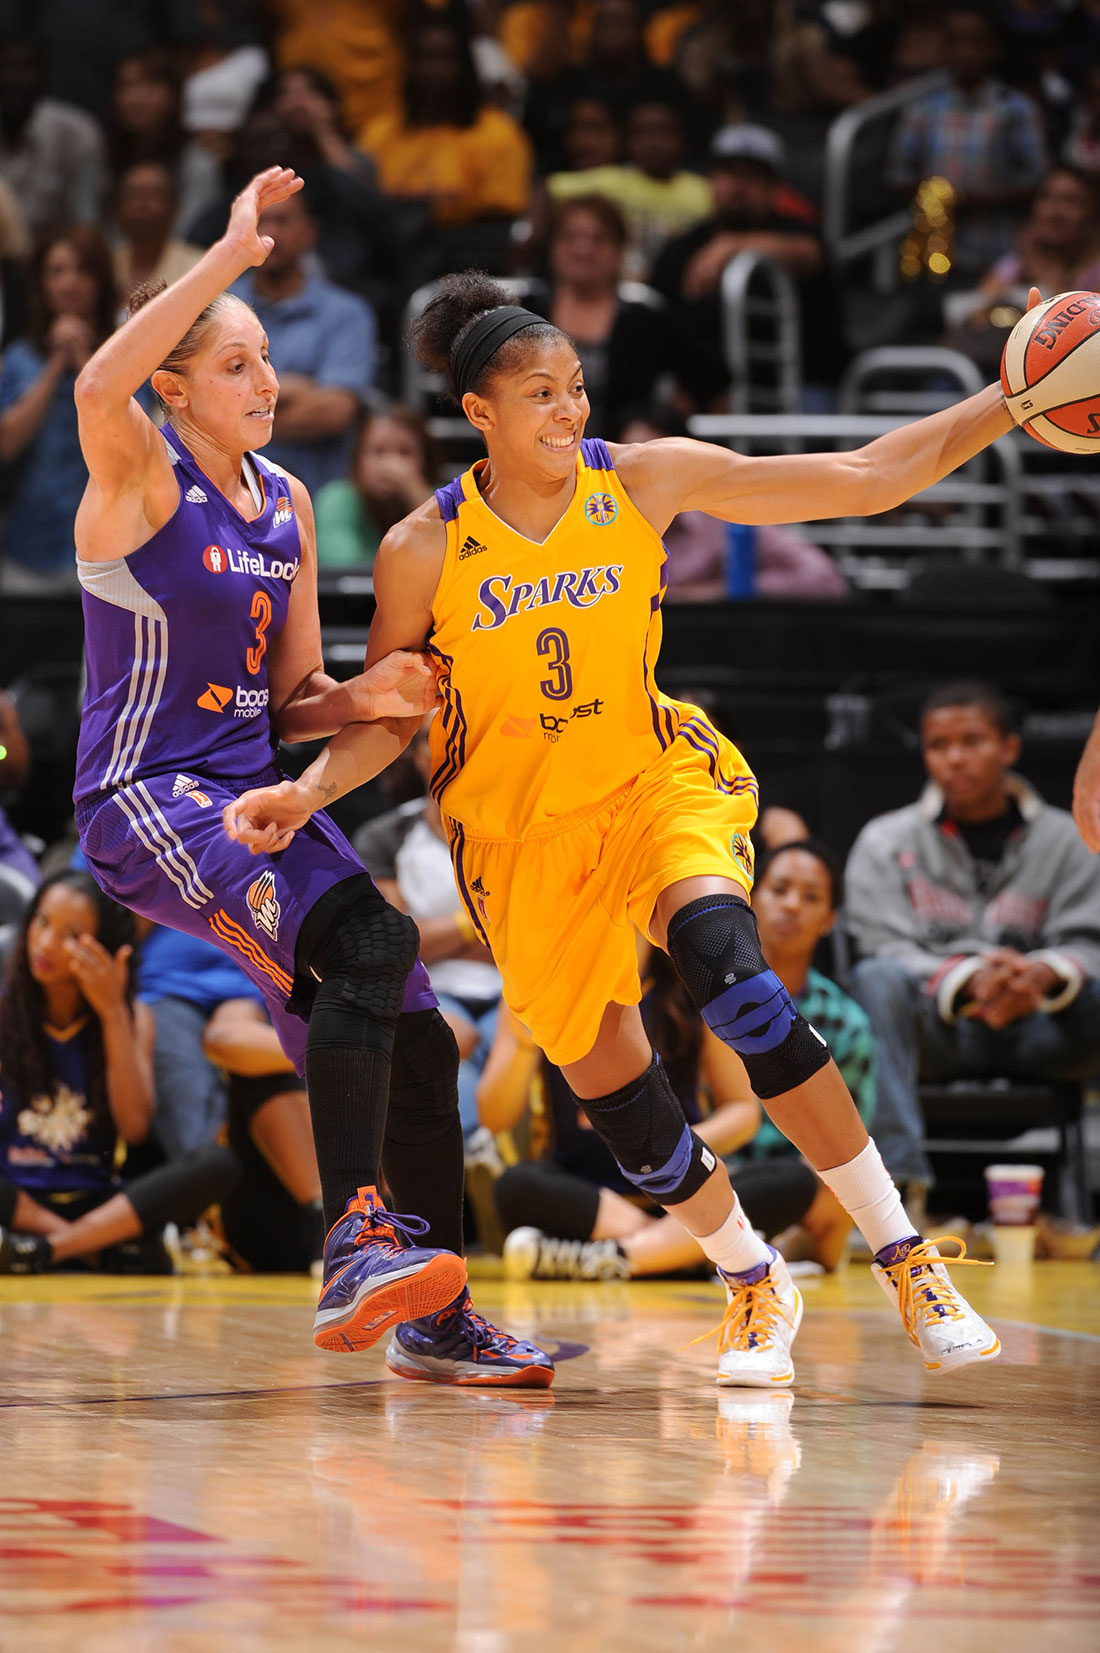 Diana Taurasi & Candace Parker en Viva Basquet Copyright 2012 NBAE Photo by Andrew D. Bernstein/NBAE via Getty Images